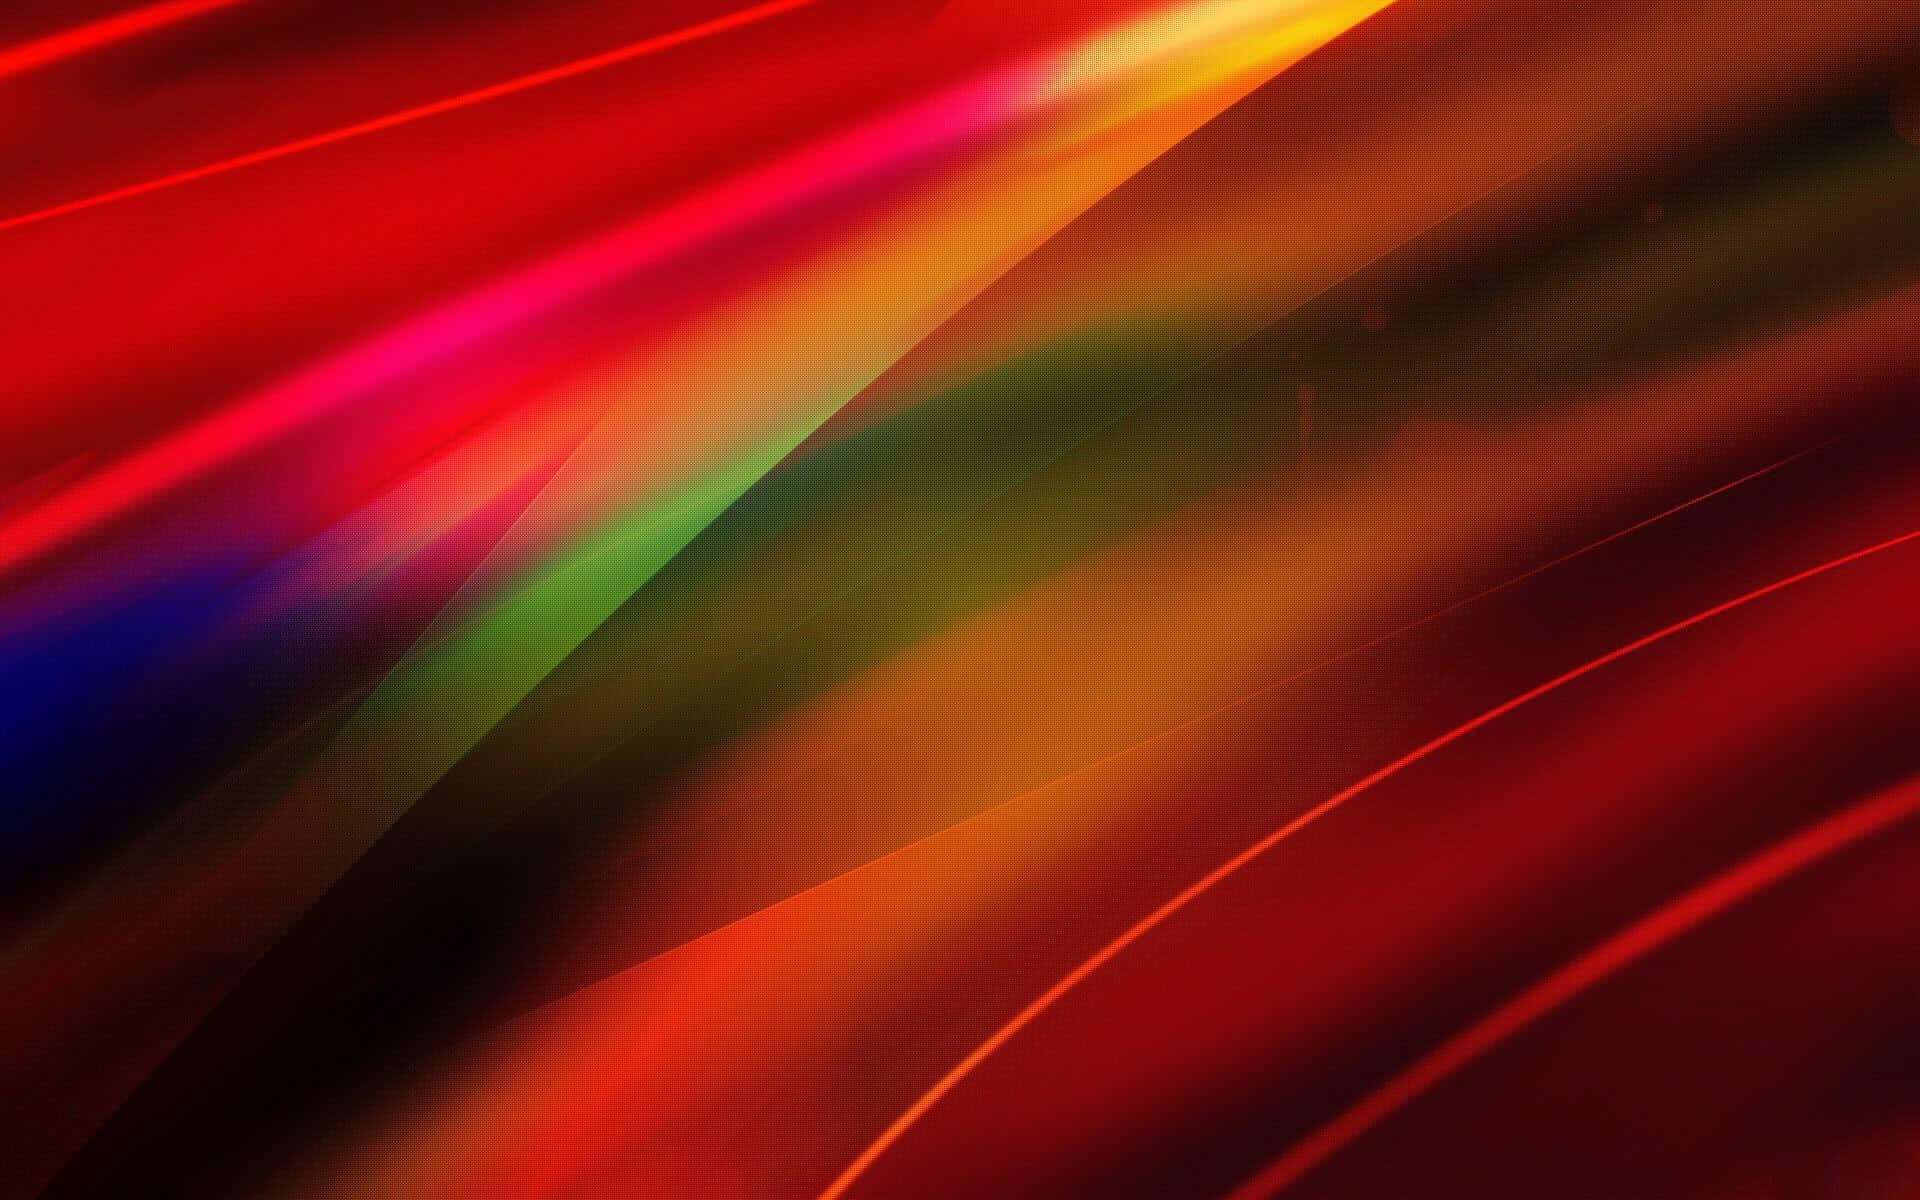 A Red And Yellow Abstract Background With A Colorful Wave Wallpaper